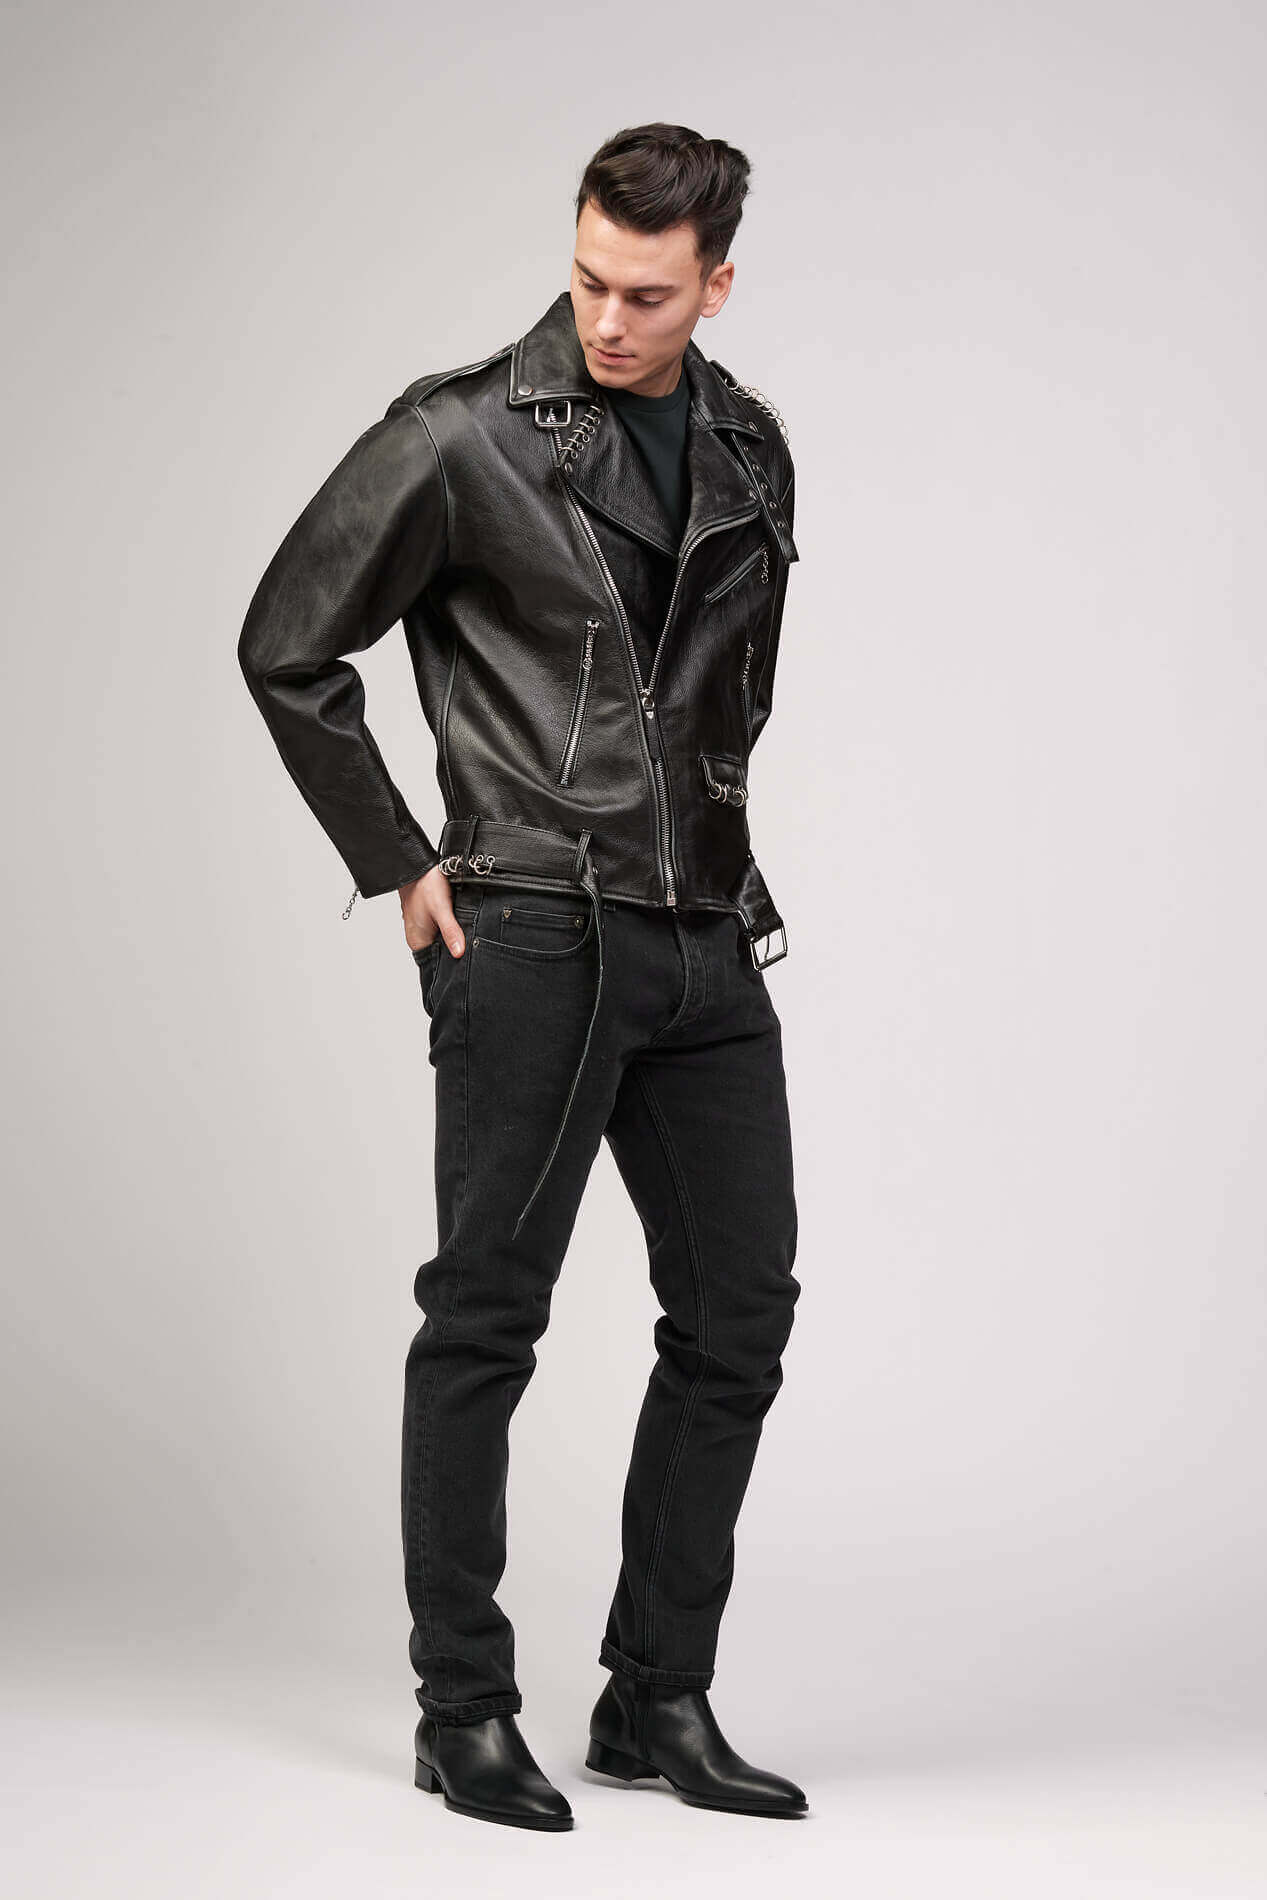 ALLEN PERFECTO JACKET Black leather jacket. Asymmetric zip closure. Rings set on the jacket. Side pocket with zip closure. Zippers on the sleeves. 100% leather. Lining 100% viscose. Made in Italy. HTC LOS ANGELES